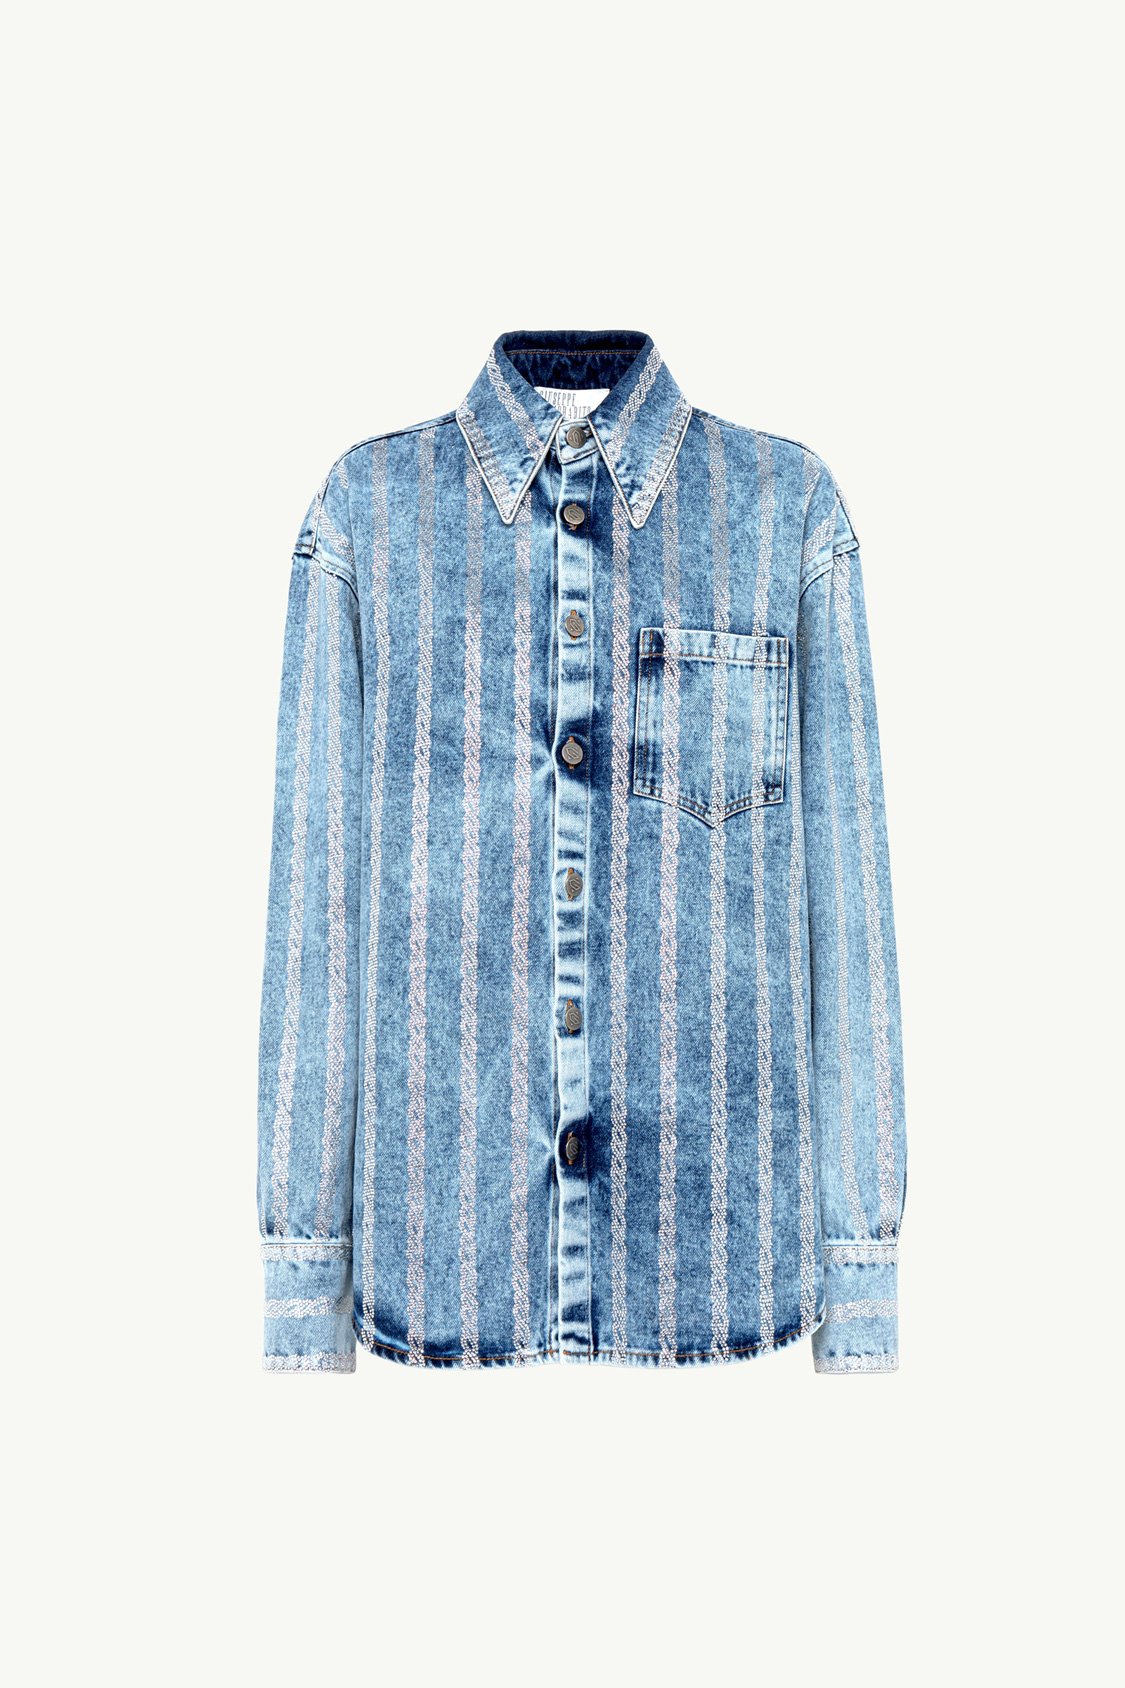 MARBLED DENIM SHIRT WITH CRYSTALS